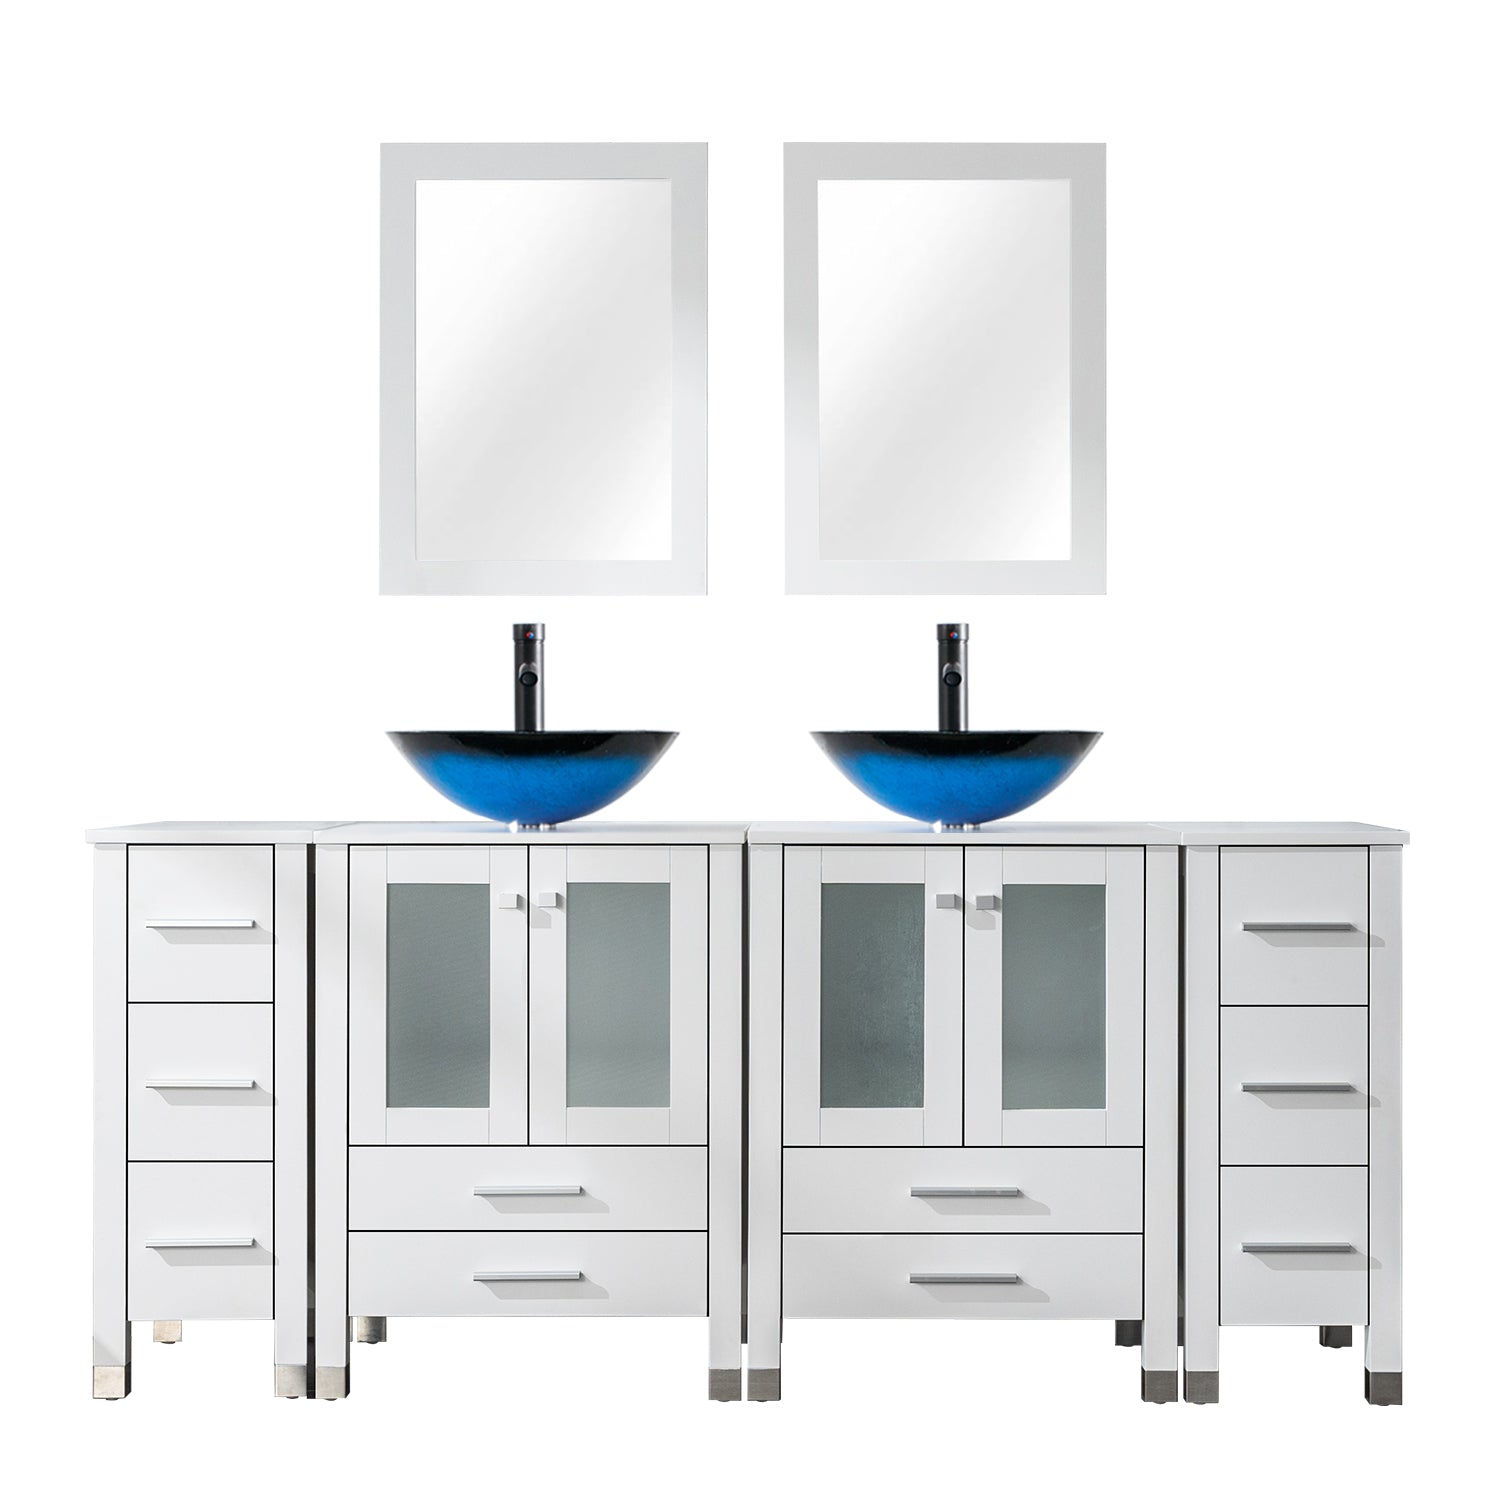 Eclife 72" Double Bathroom Vanity Sink Combos, Solid Wood Construction and Painted Frame - White